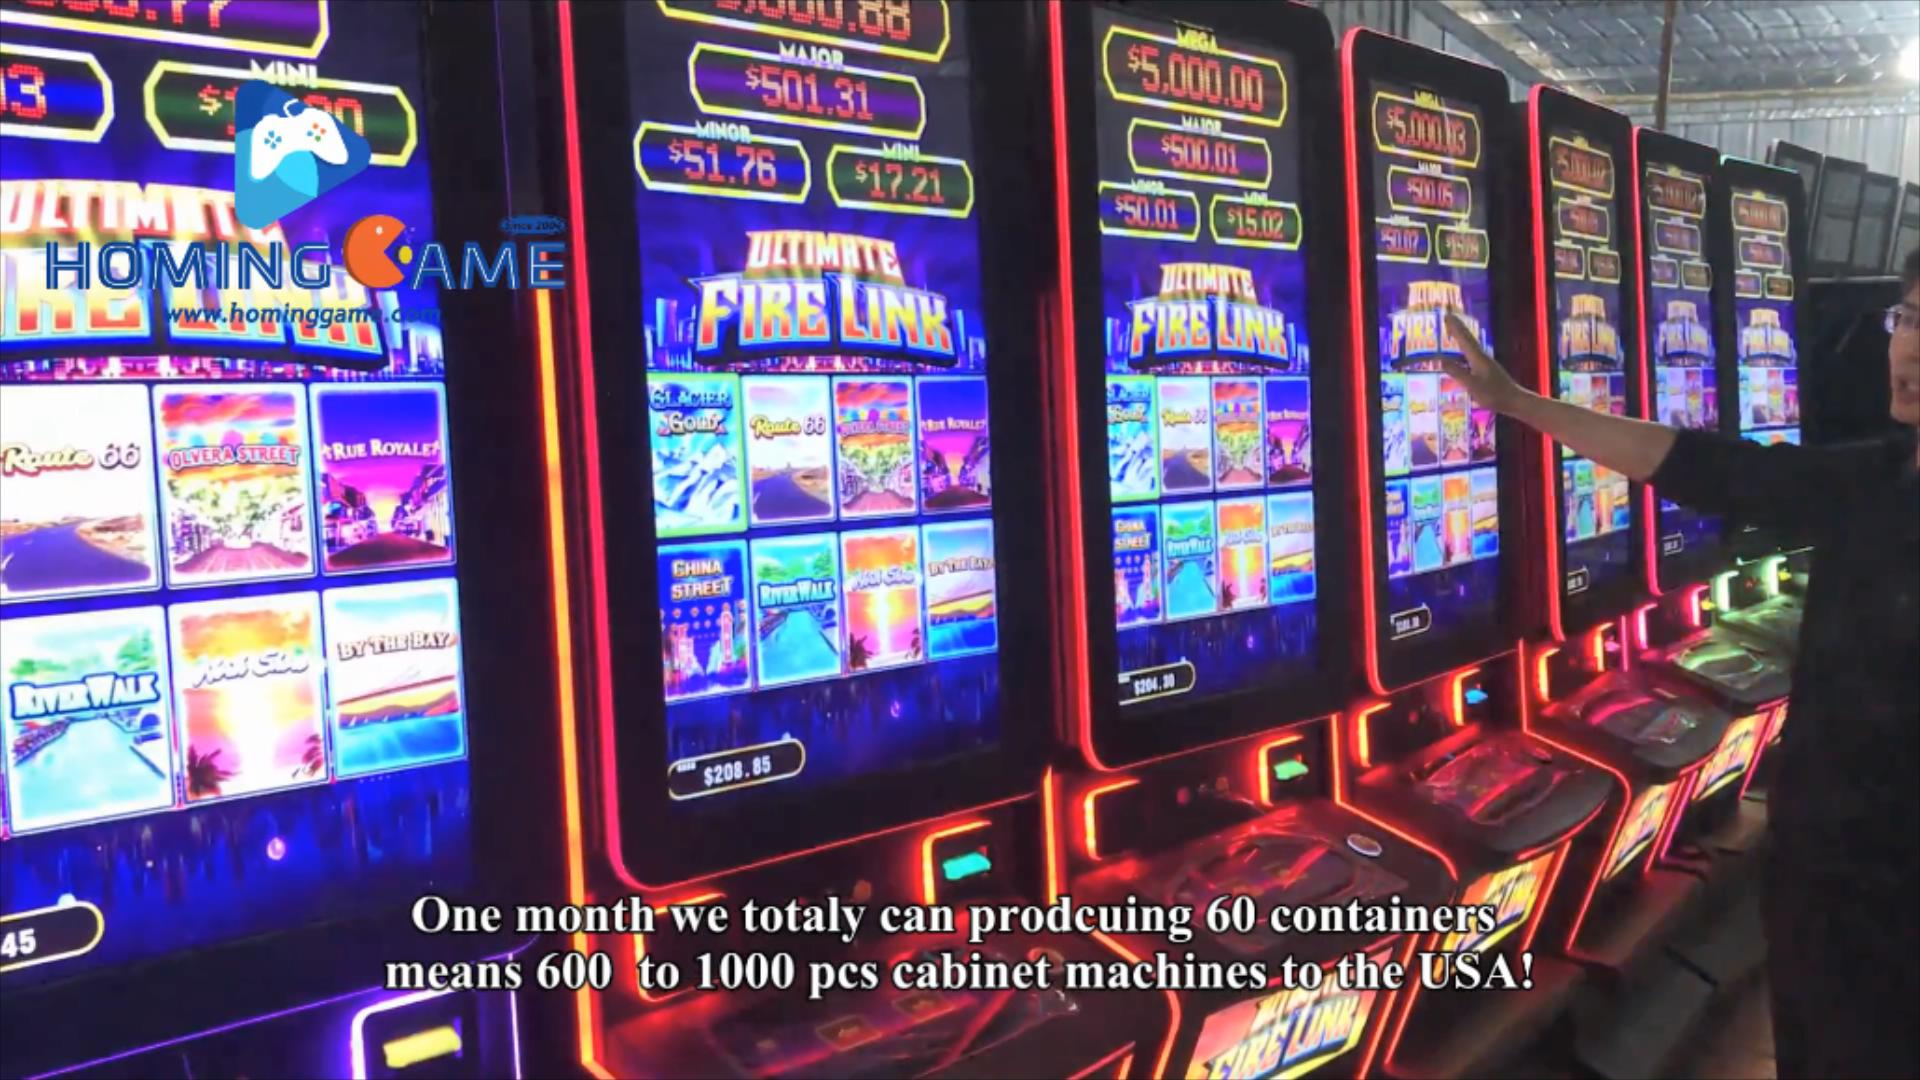 2021 USA Best Slot Table Game Machine Manufactuer By HomingGame Producing All kind of Slot Table,Fire link,Dragon link,Fusion 4,golden master,money gold,lighting ,panda link slot table game machine (Order Call Whatsapp:+8618688409495),43